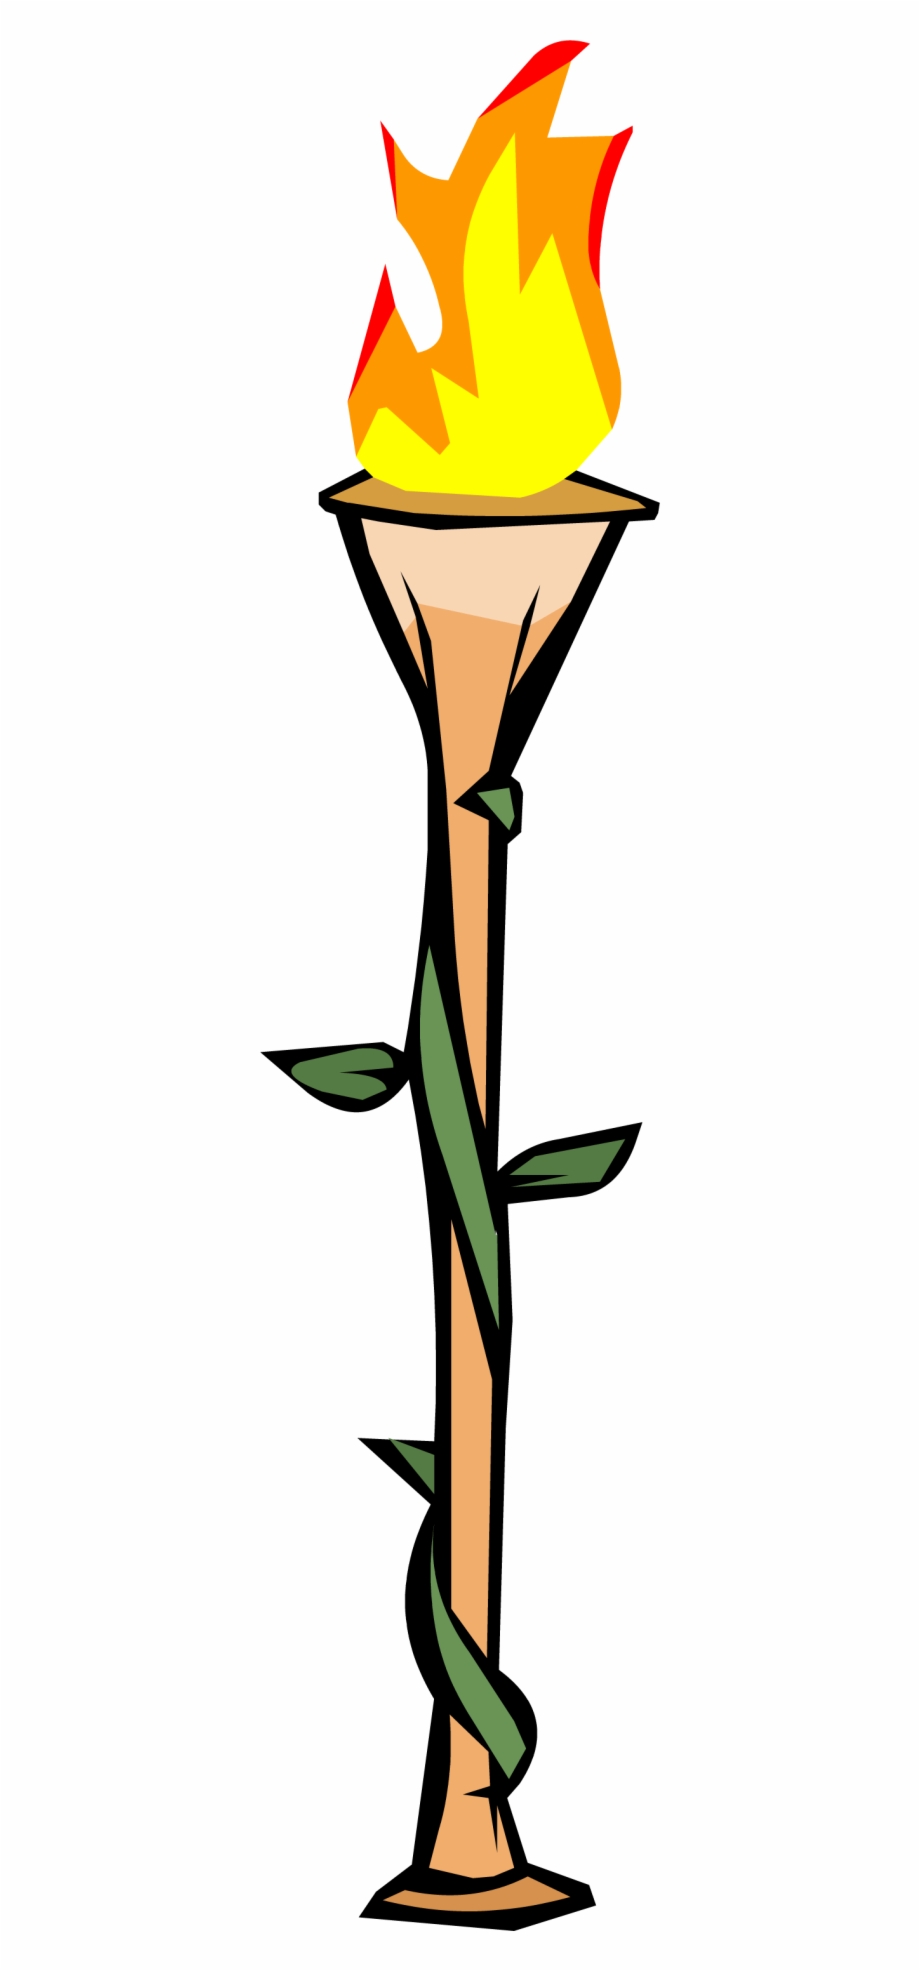 Bamboo torch clipart.